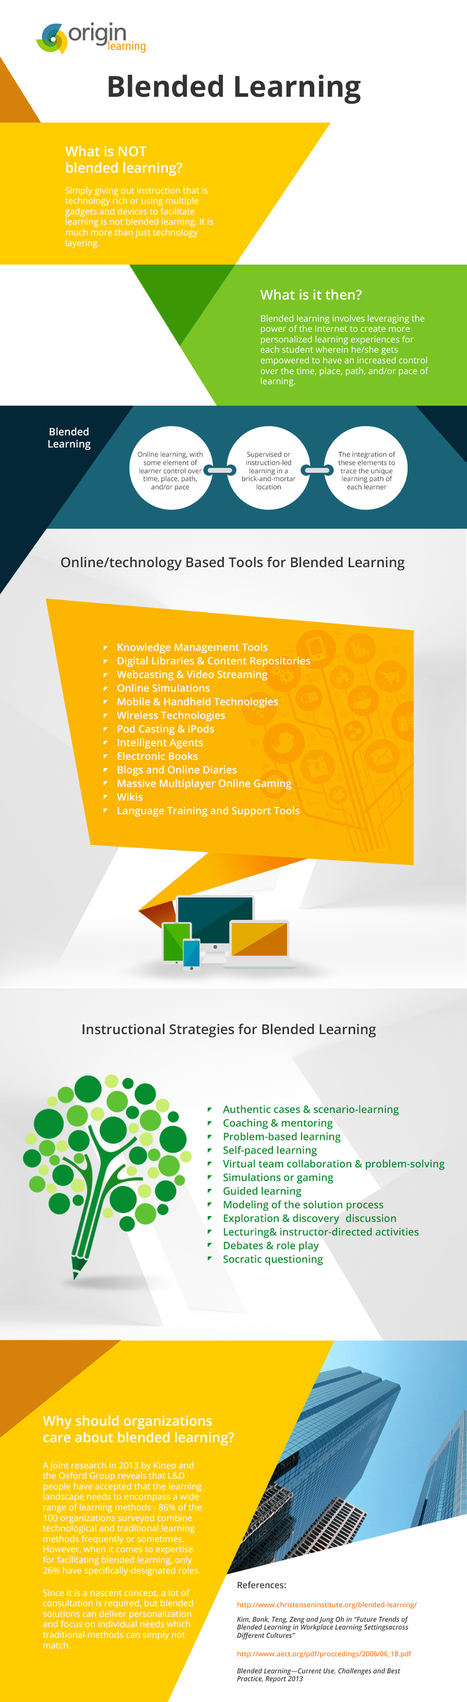 The Mystery of Blended Learning Infographic - e-Learning Infographics | iGeneration - 21st Century Education (Pedagogy & Digital Innovation) | Scoop.it